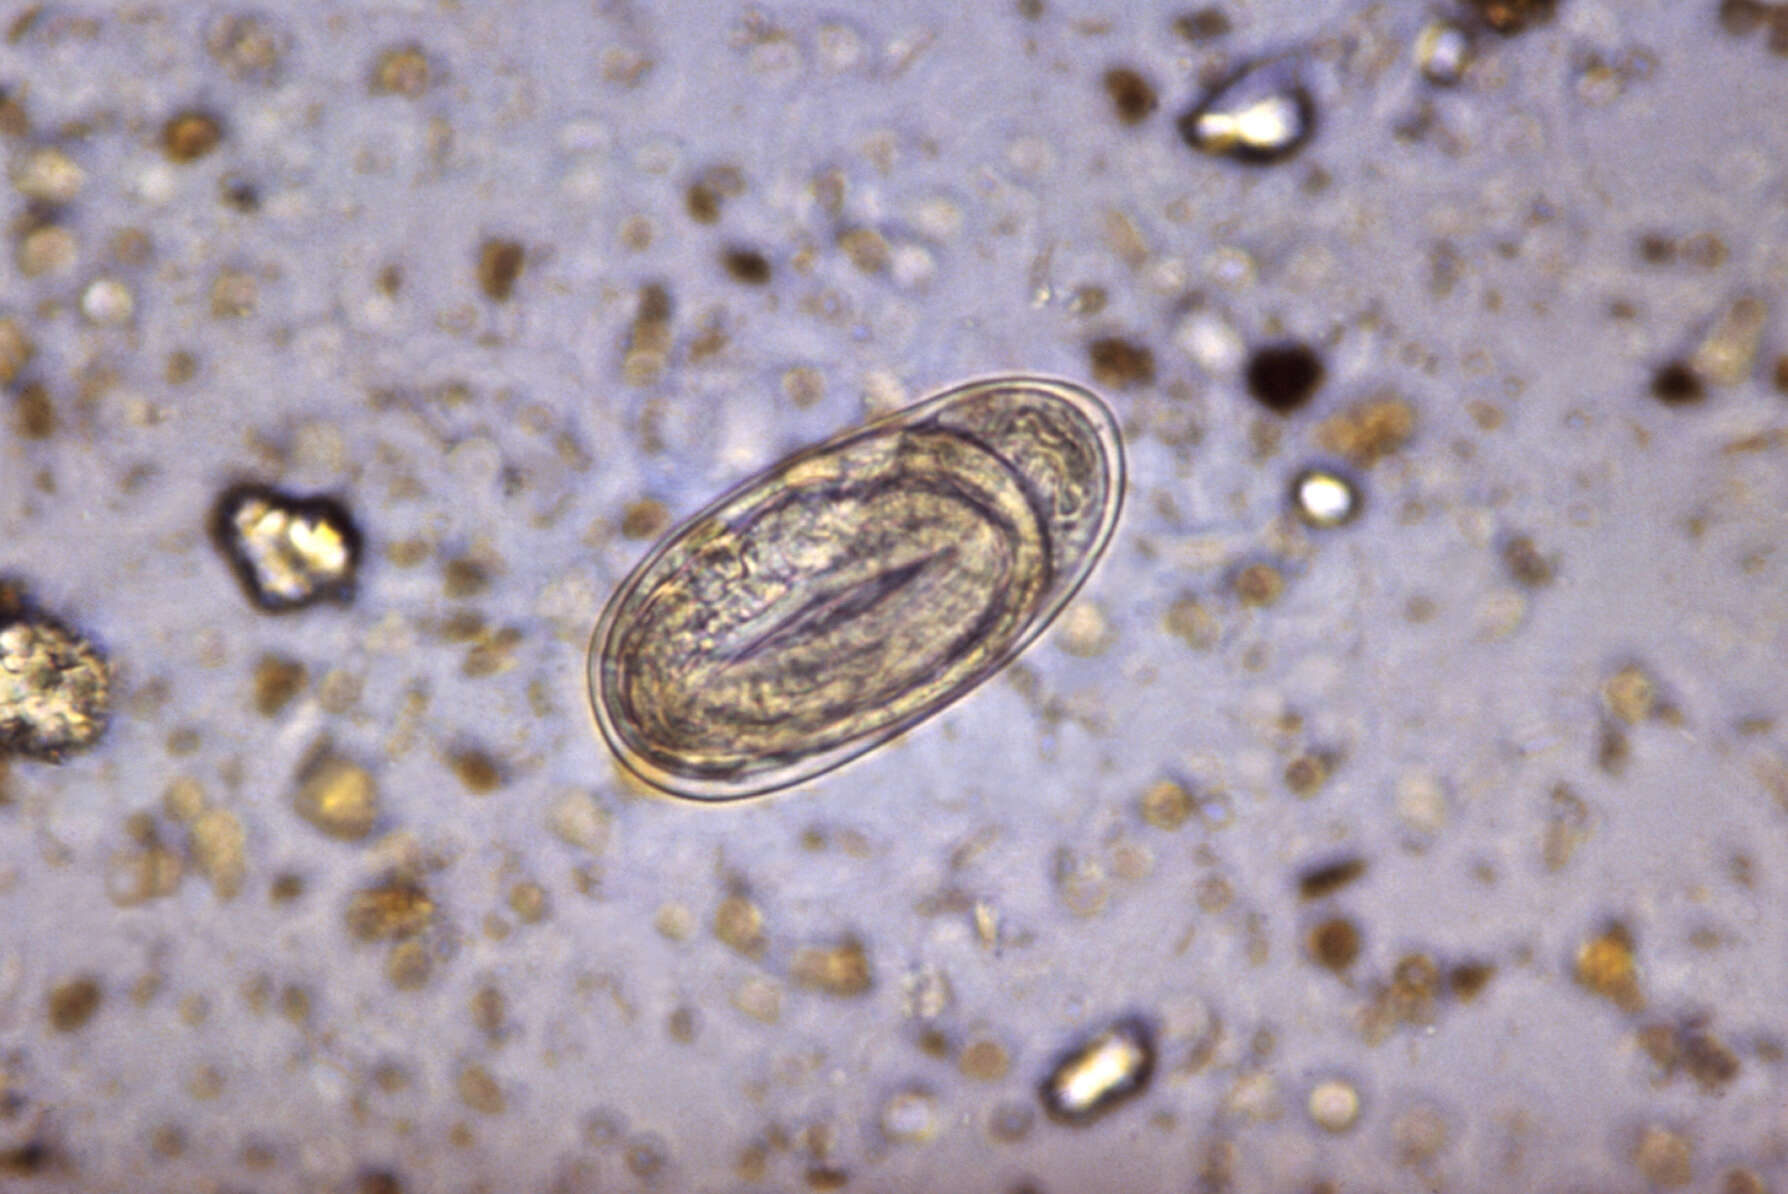 Image of Ancylostoma duodenale